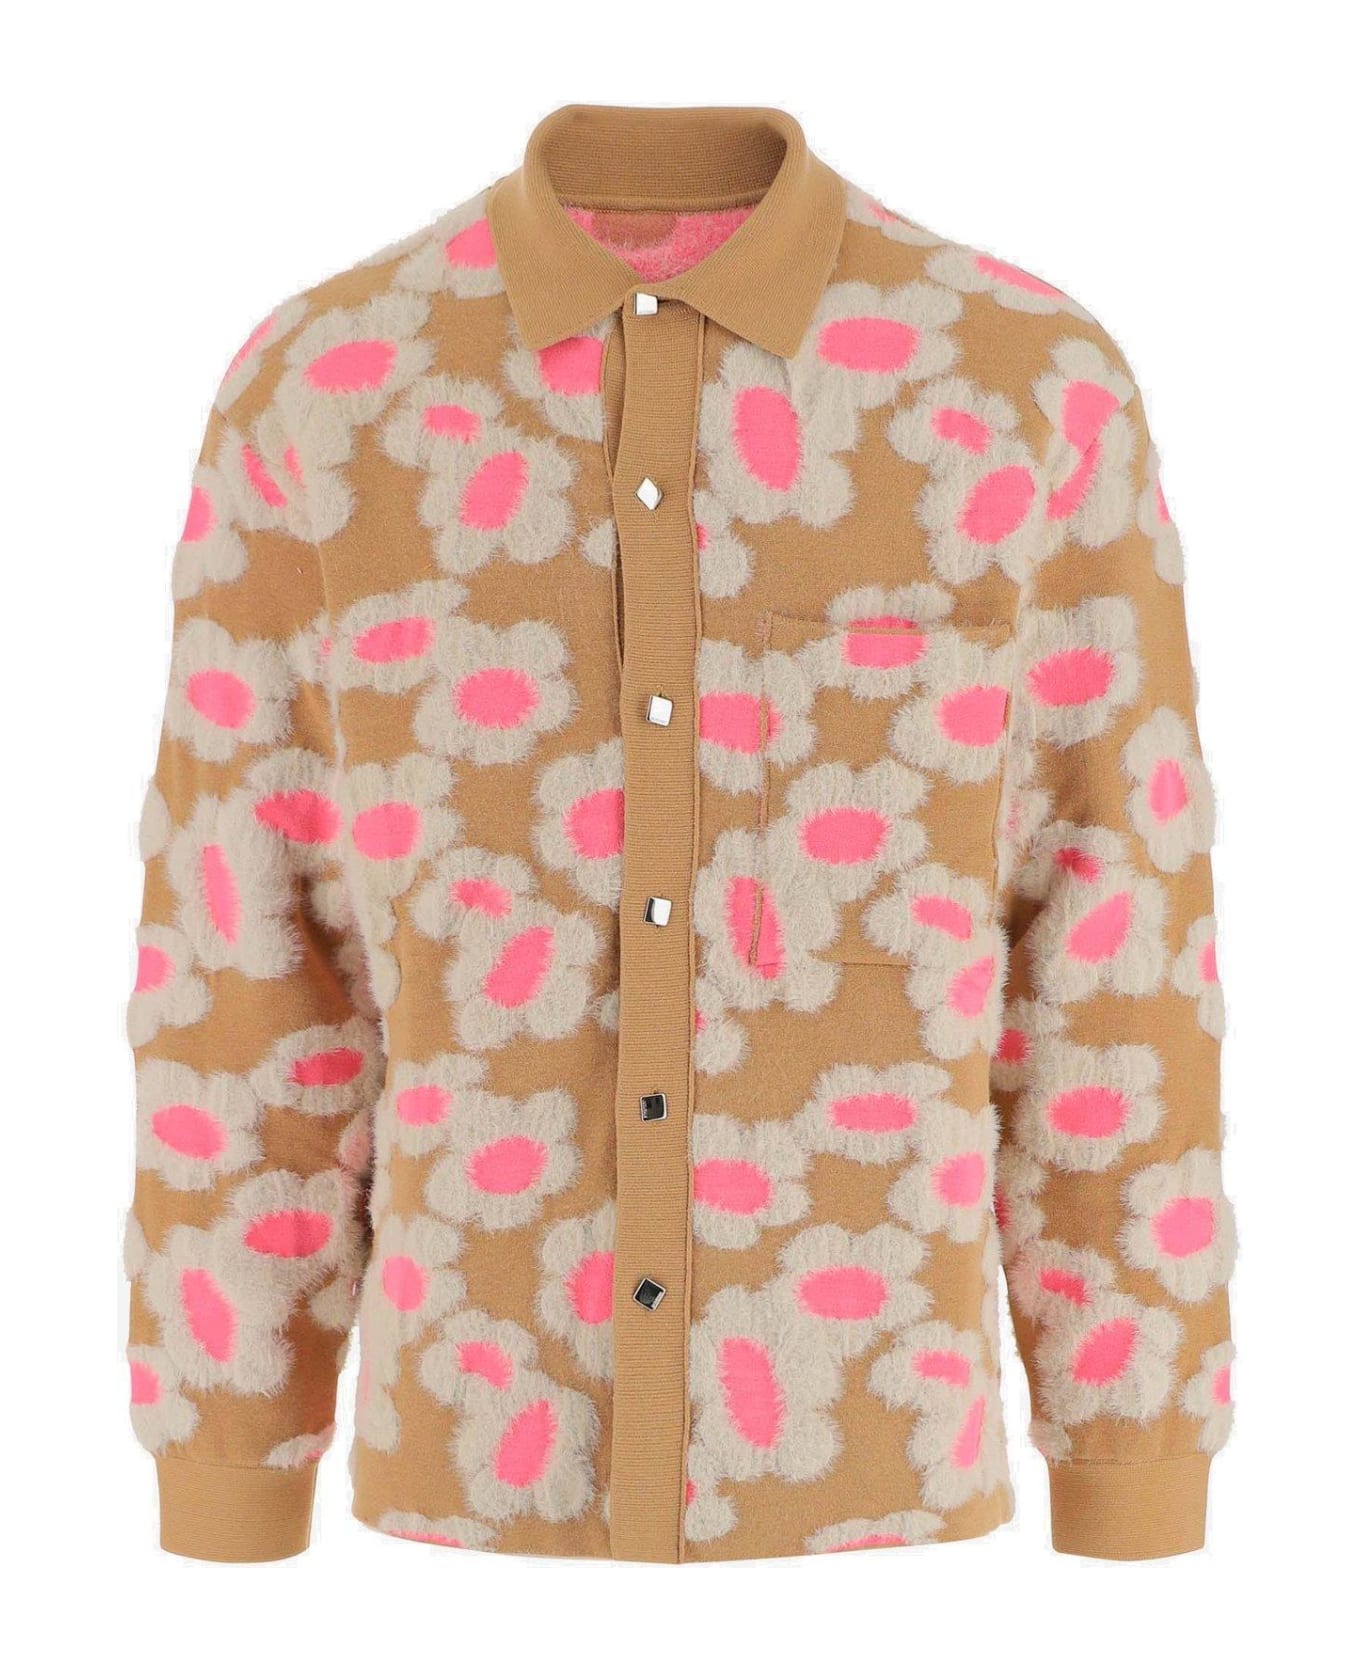 Jacquemus Floral Patterned Long-sleeved Shirt - MULTICOLOR